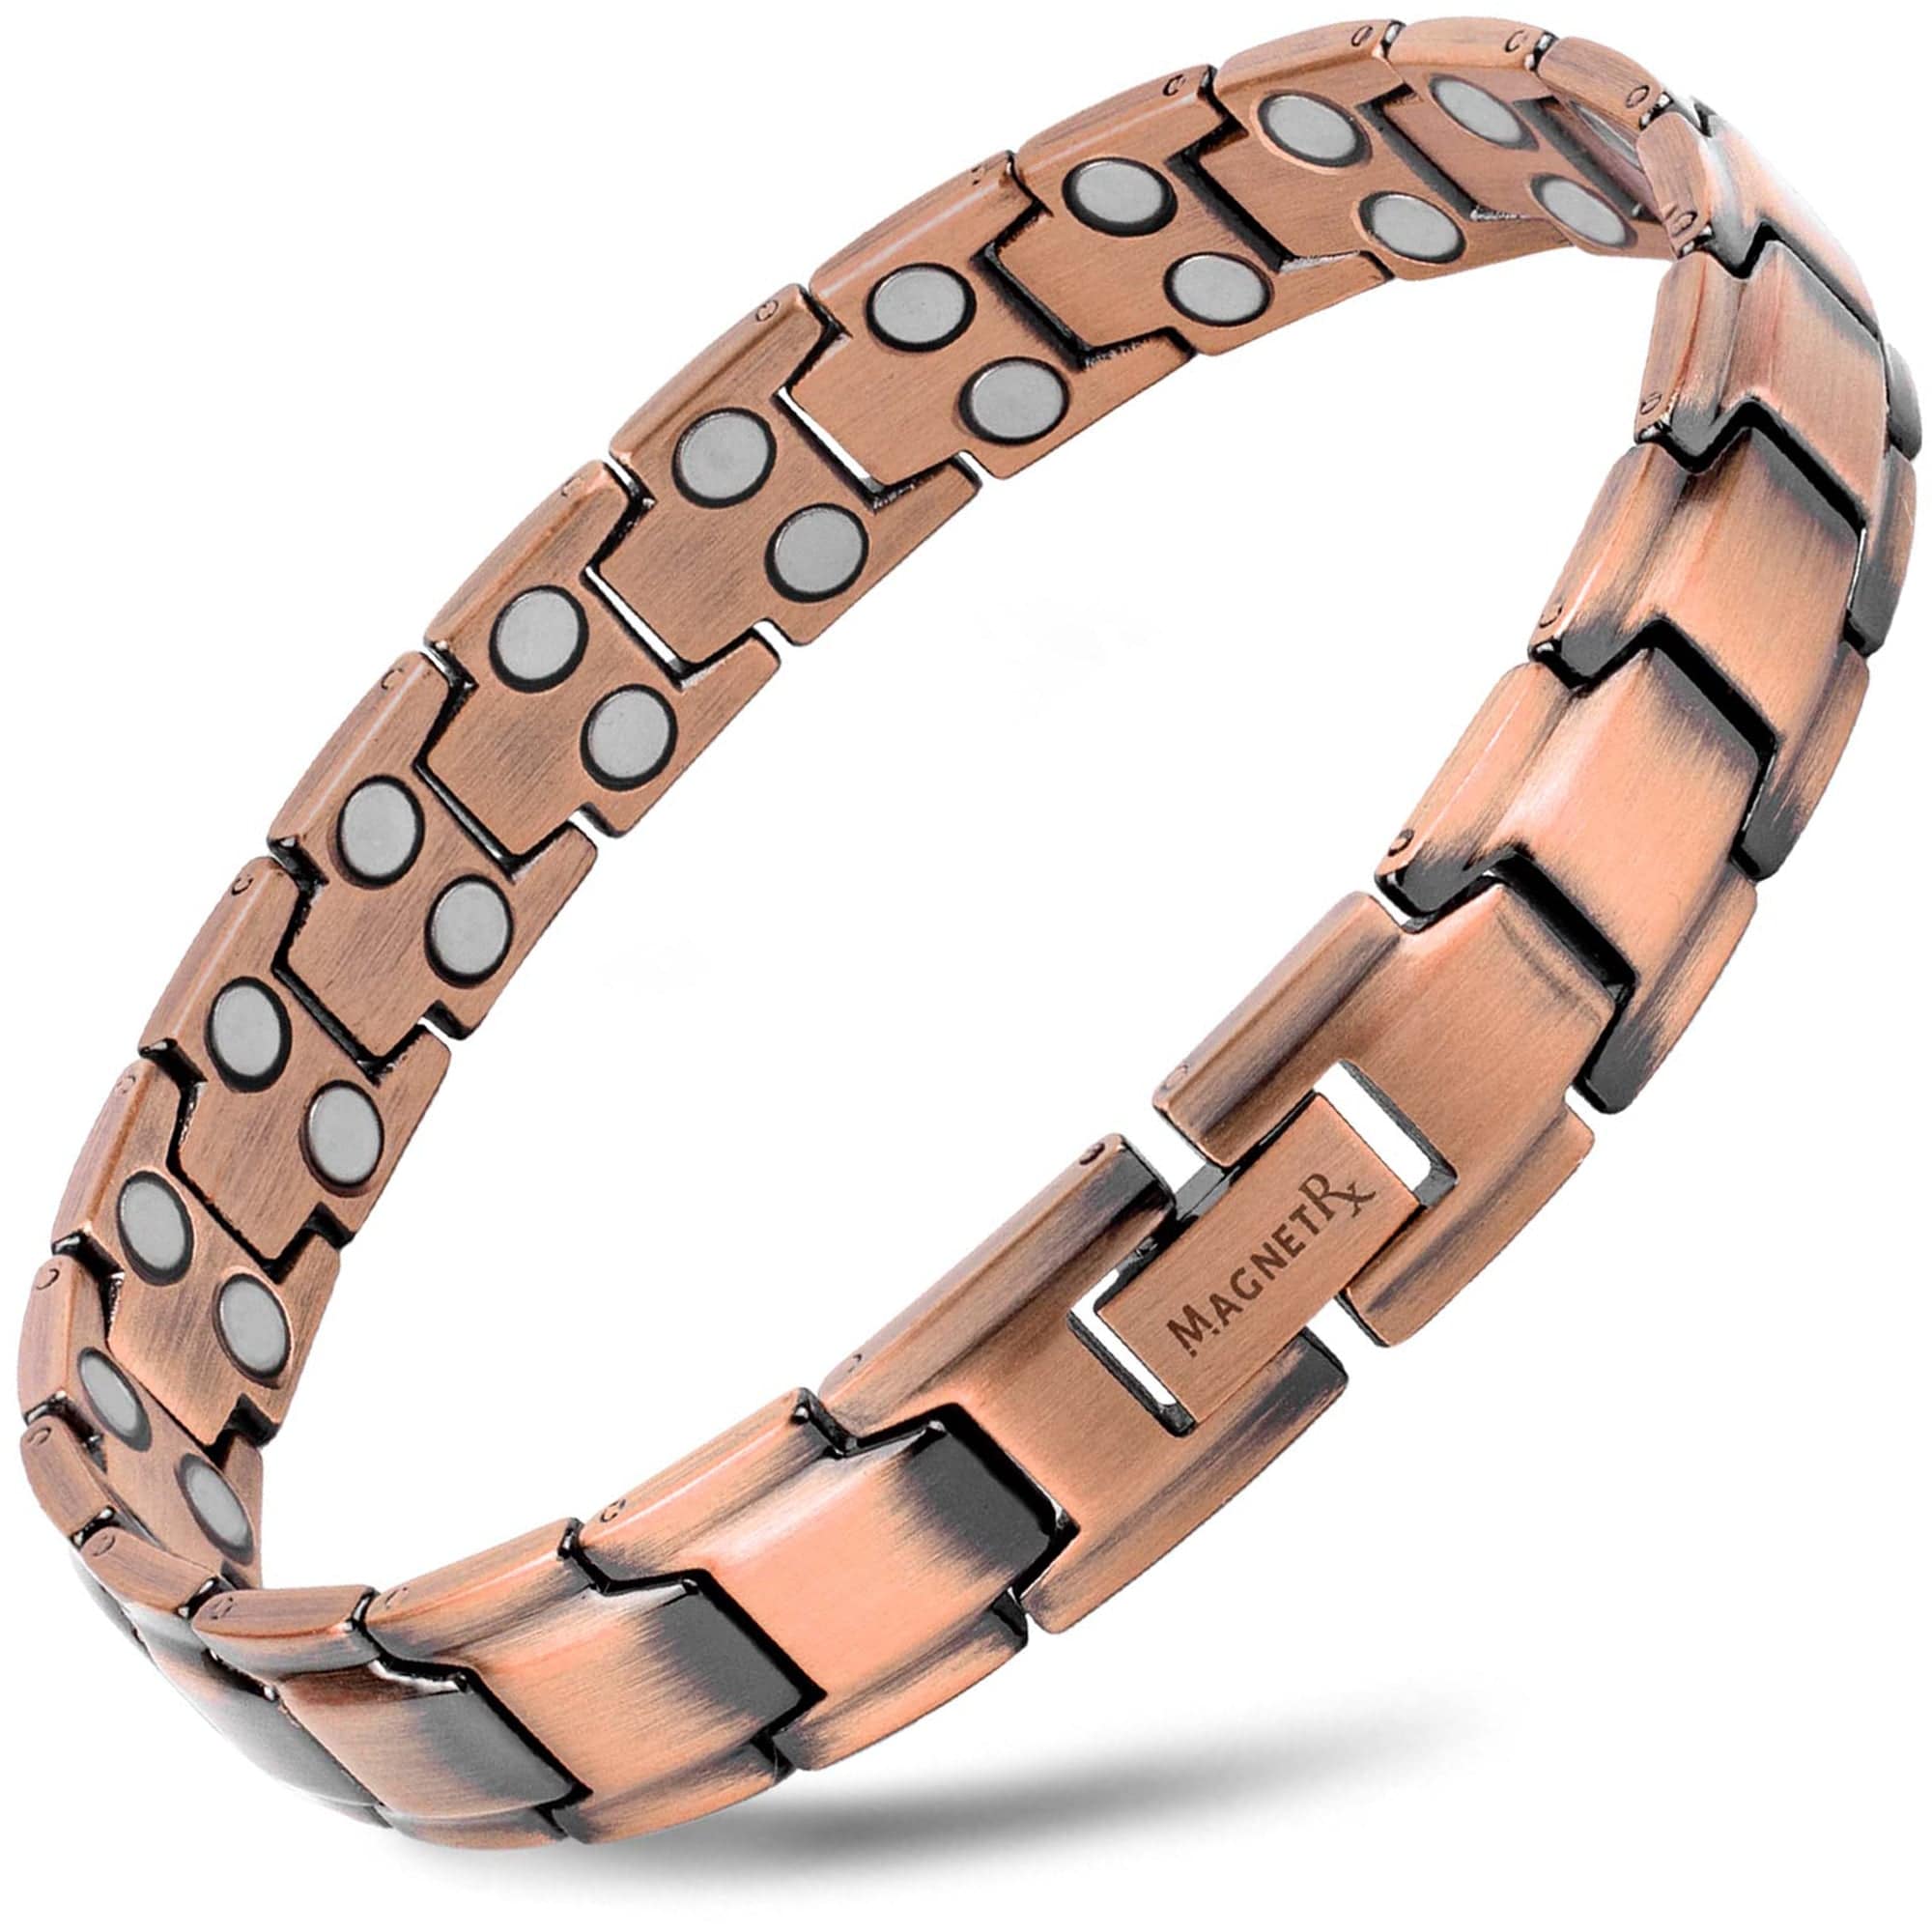 Ultra Strength Pure Copper Magnetic Therapy Bracelet | MagnetRX